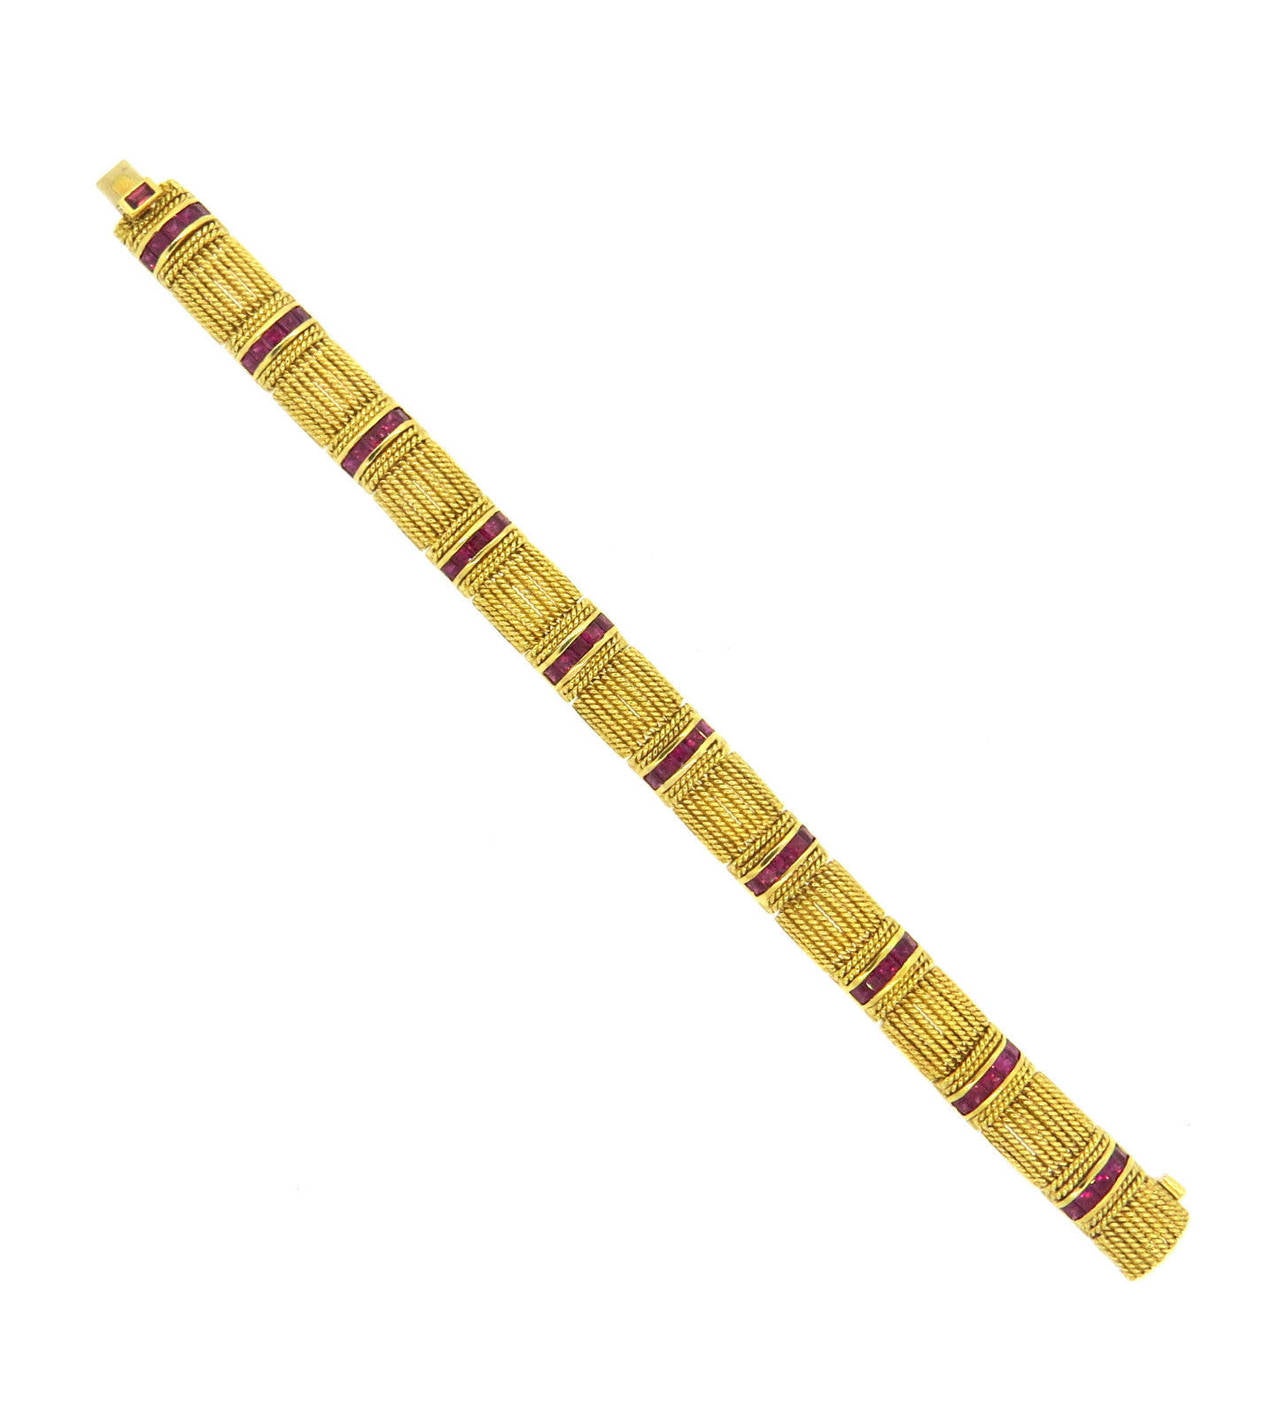 18k yellow gold multi-row bracelet, crafted by Roberto Coin, set with vibrant rubies. Bracelet is 7